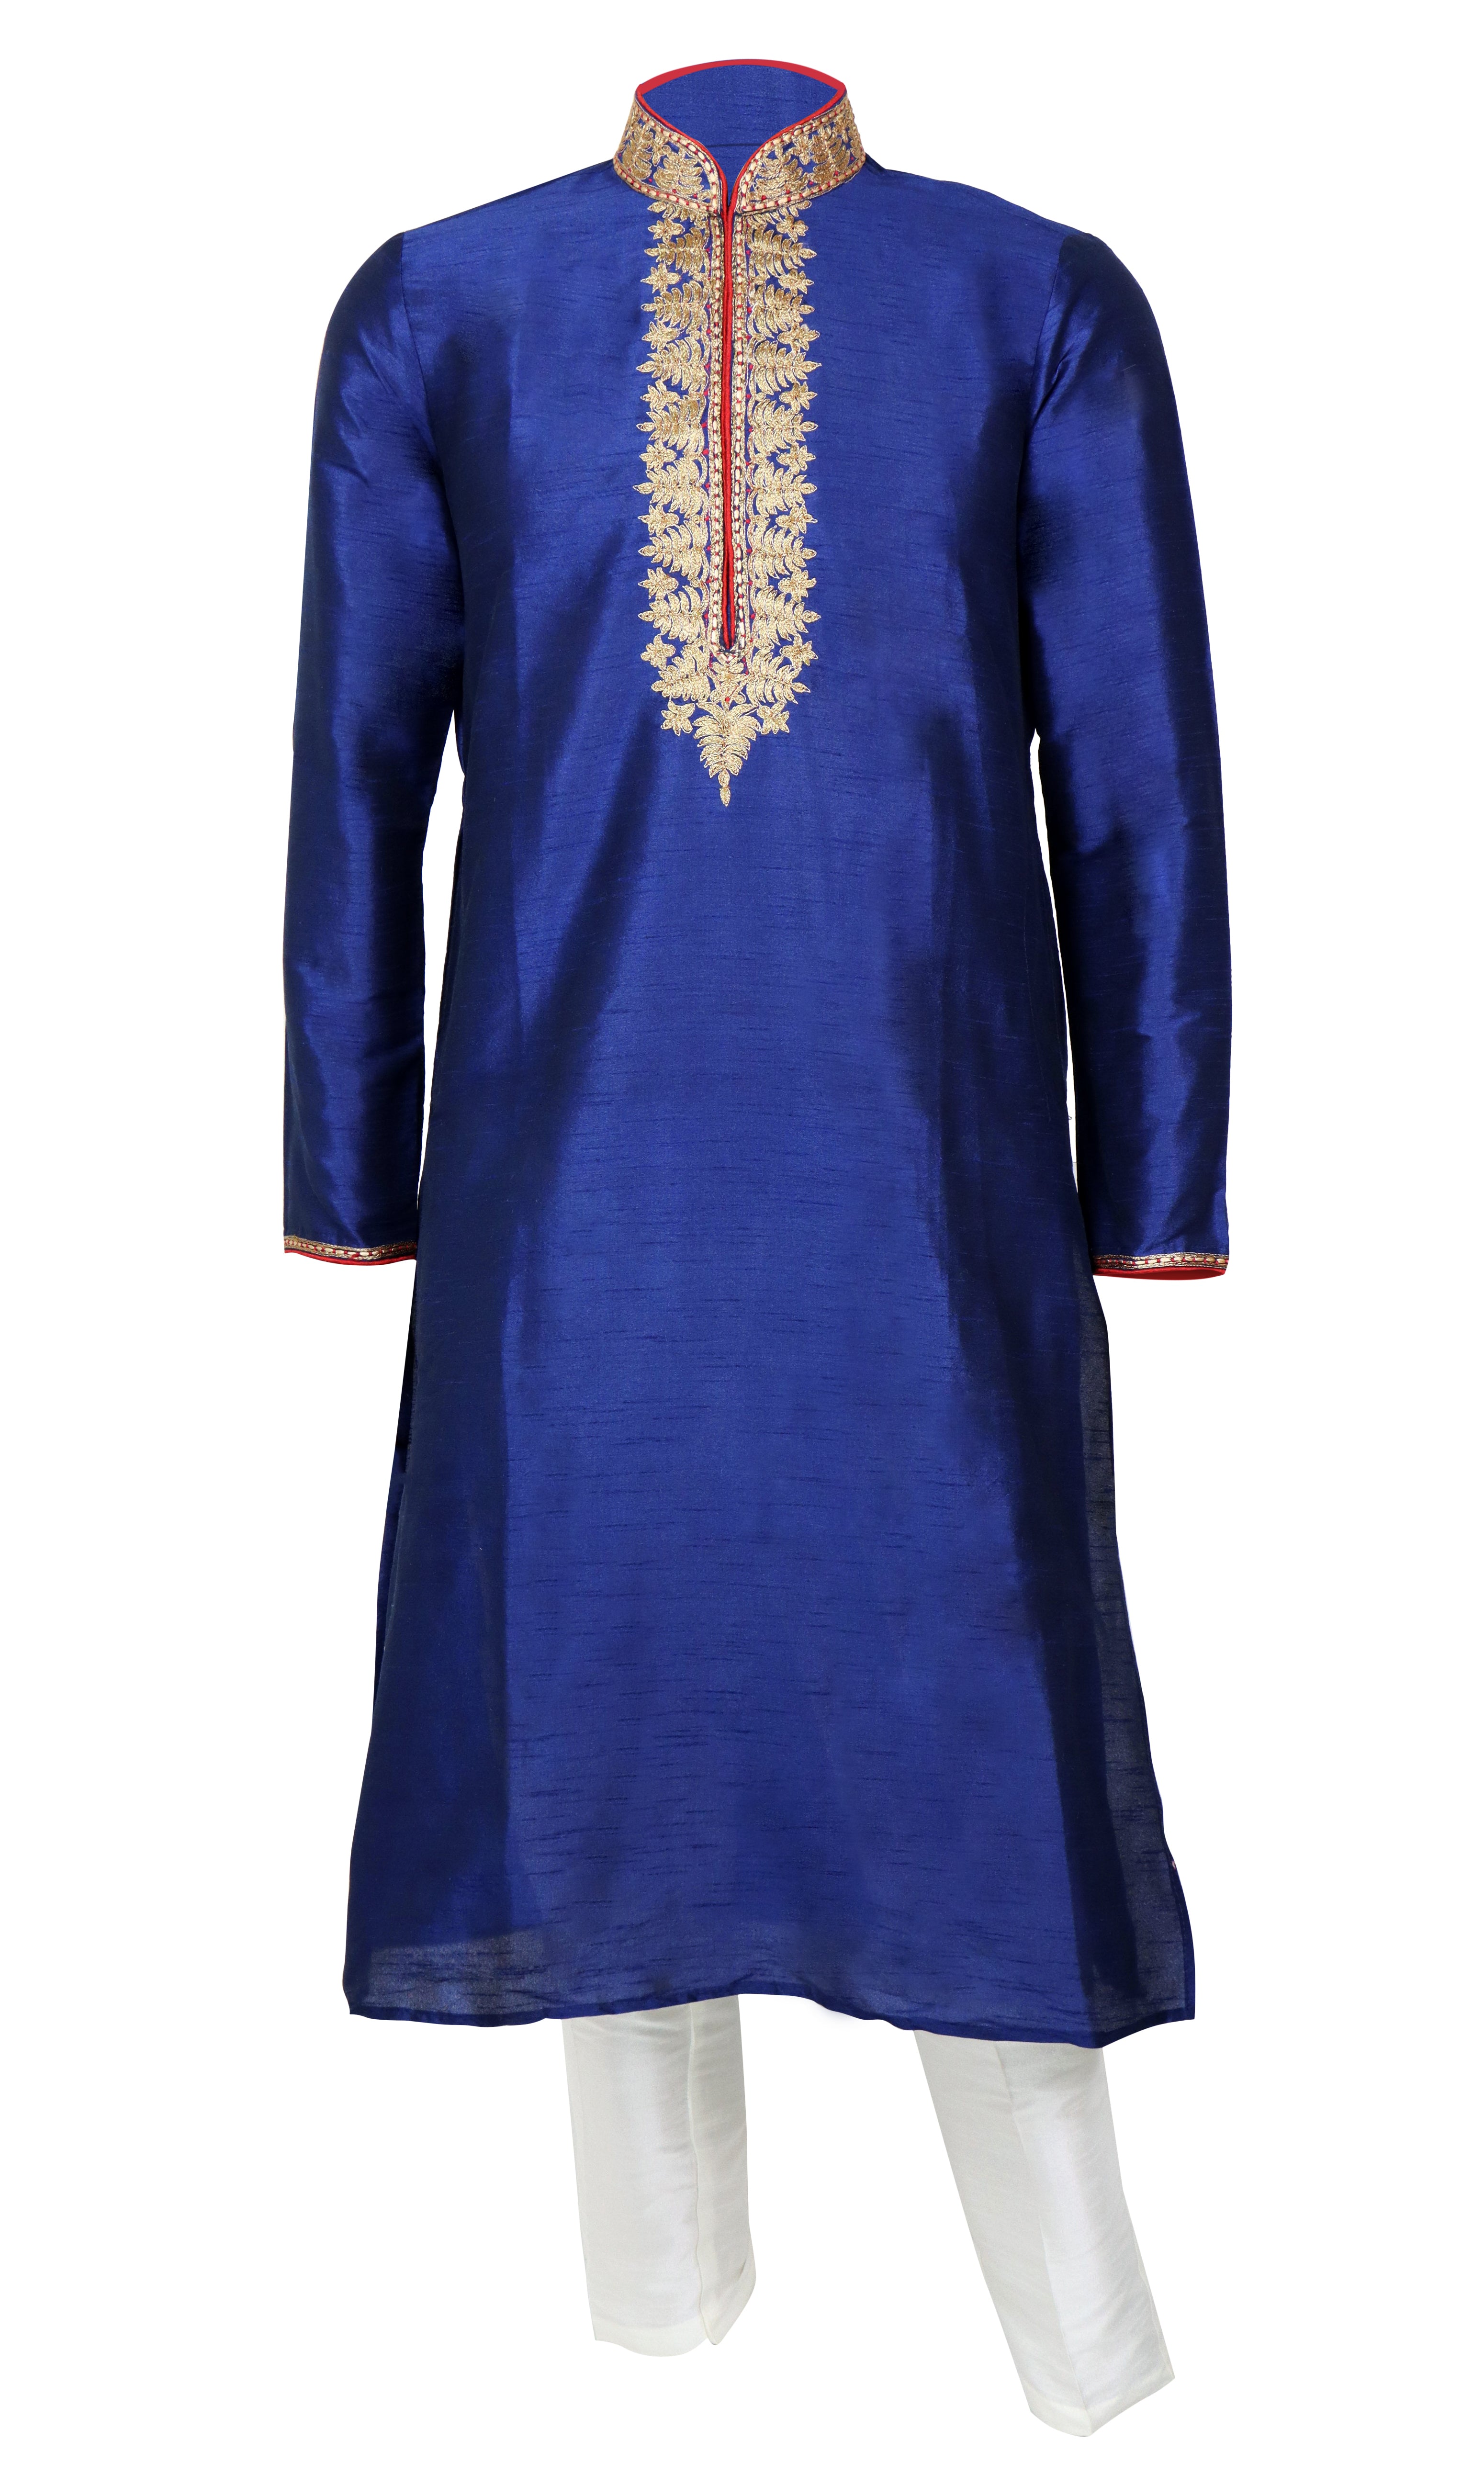 Deep blue color silk kurta gold and red embroidery through the center, paired with white pants.